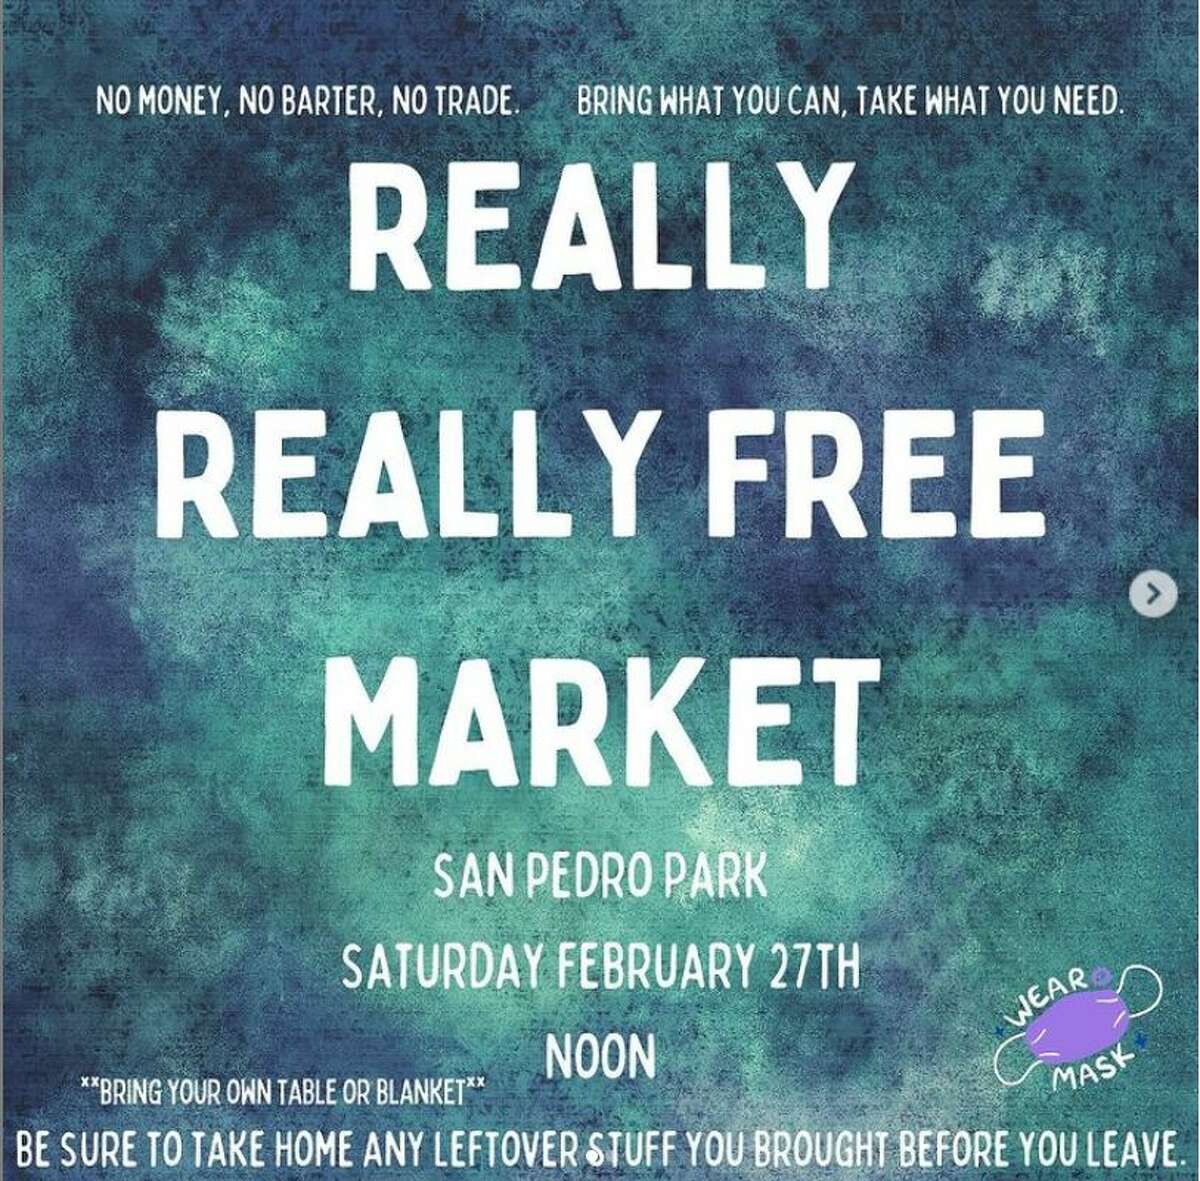 SAN ANTONIO REALLY REALLY FREE MARKET San Antonians have a chance to help those out in need and find free resources at the "Really Really Free Market." Those participating can bring what they can, like clothes and food, and take what they need. Their next market starts at noon on February 27 at San Pedro Park.